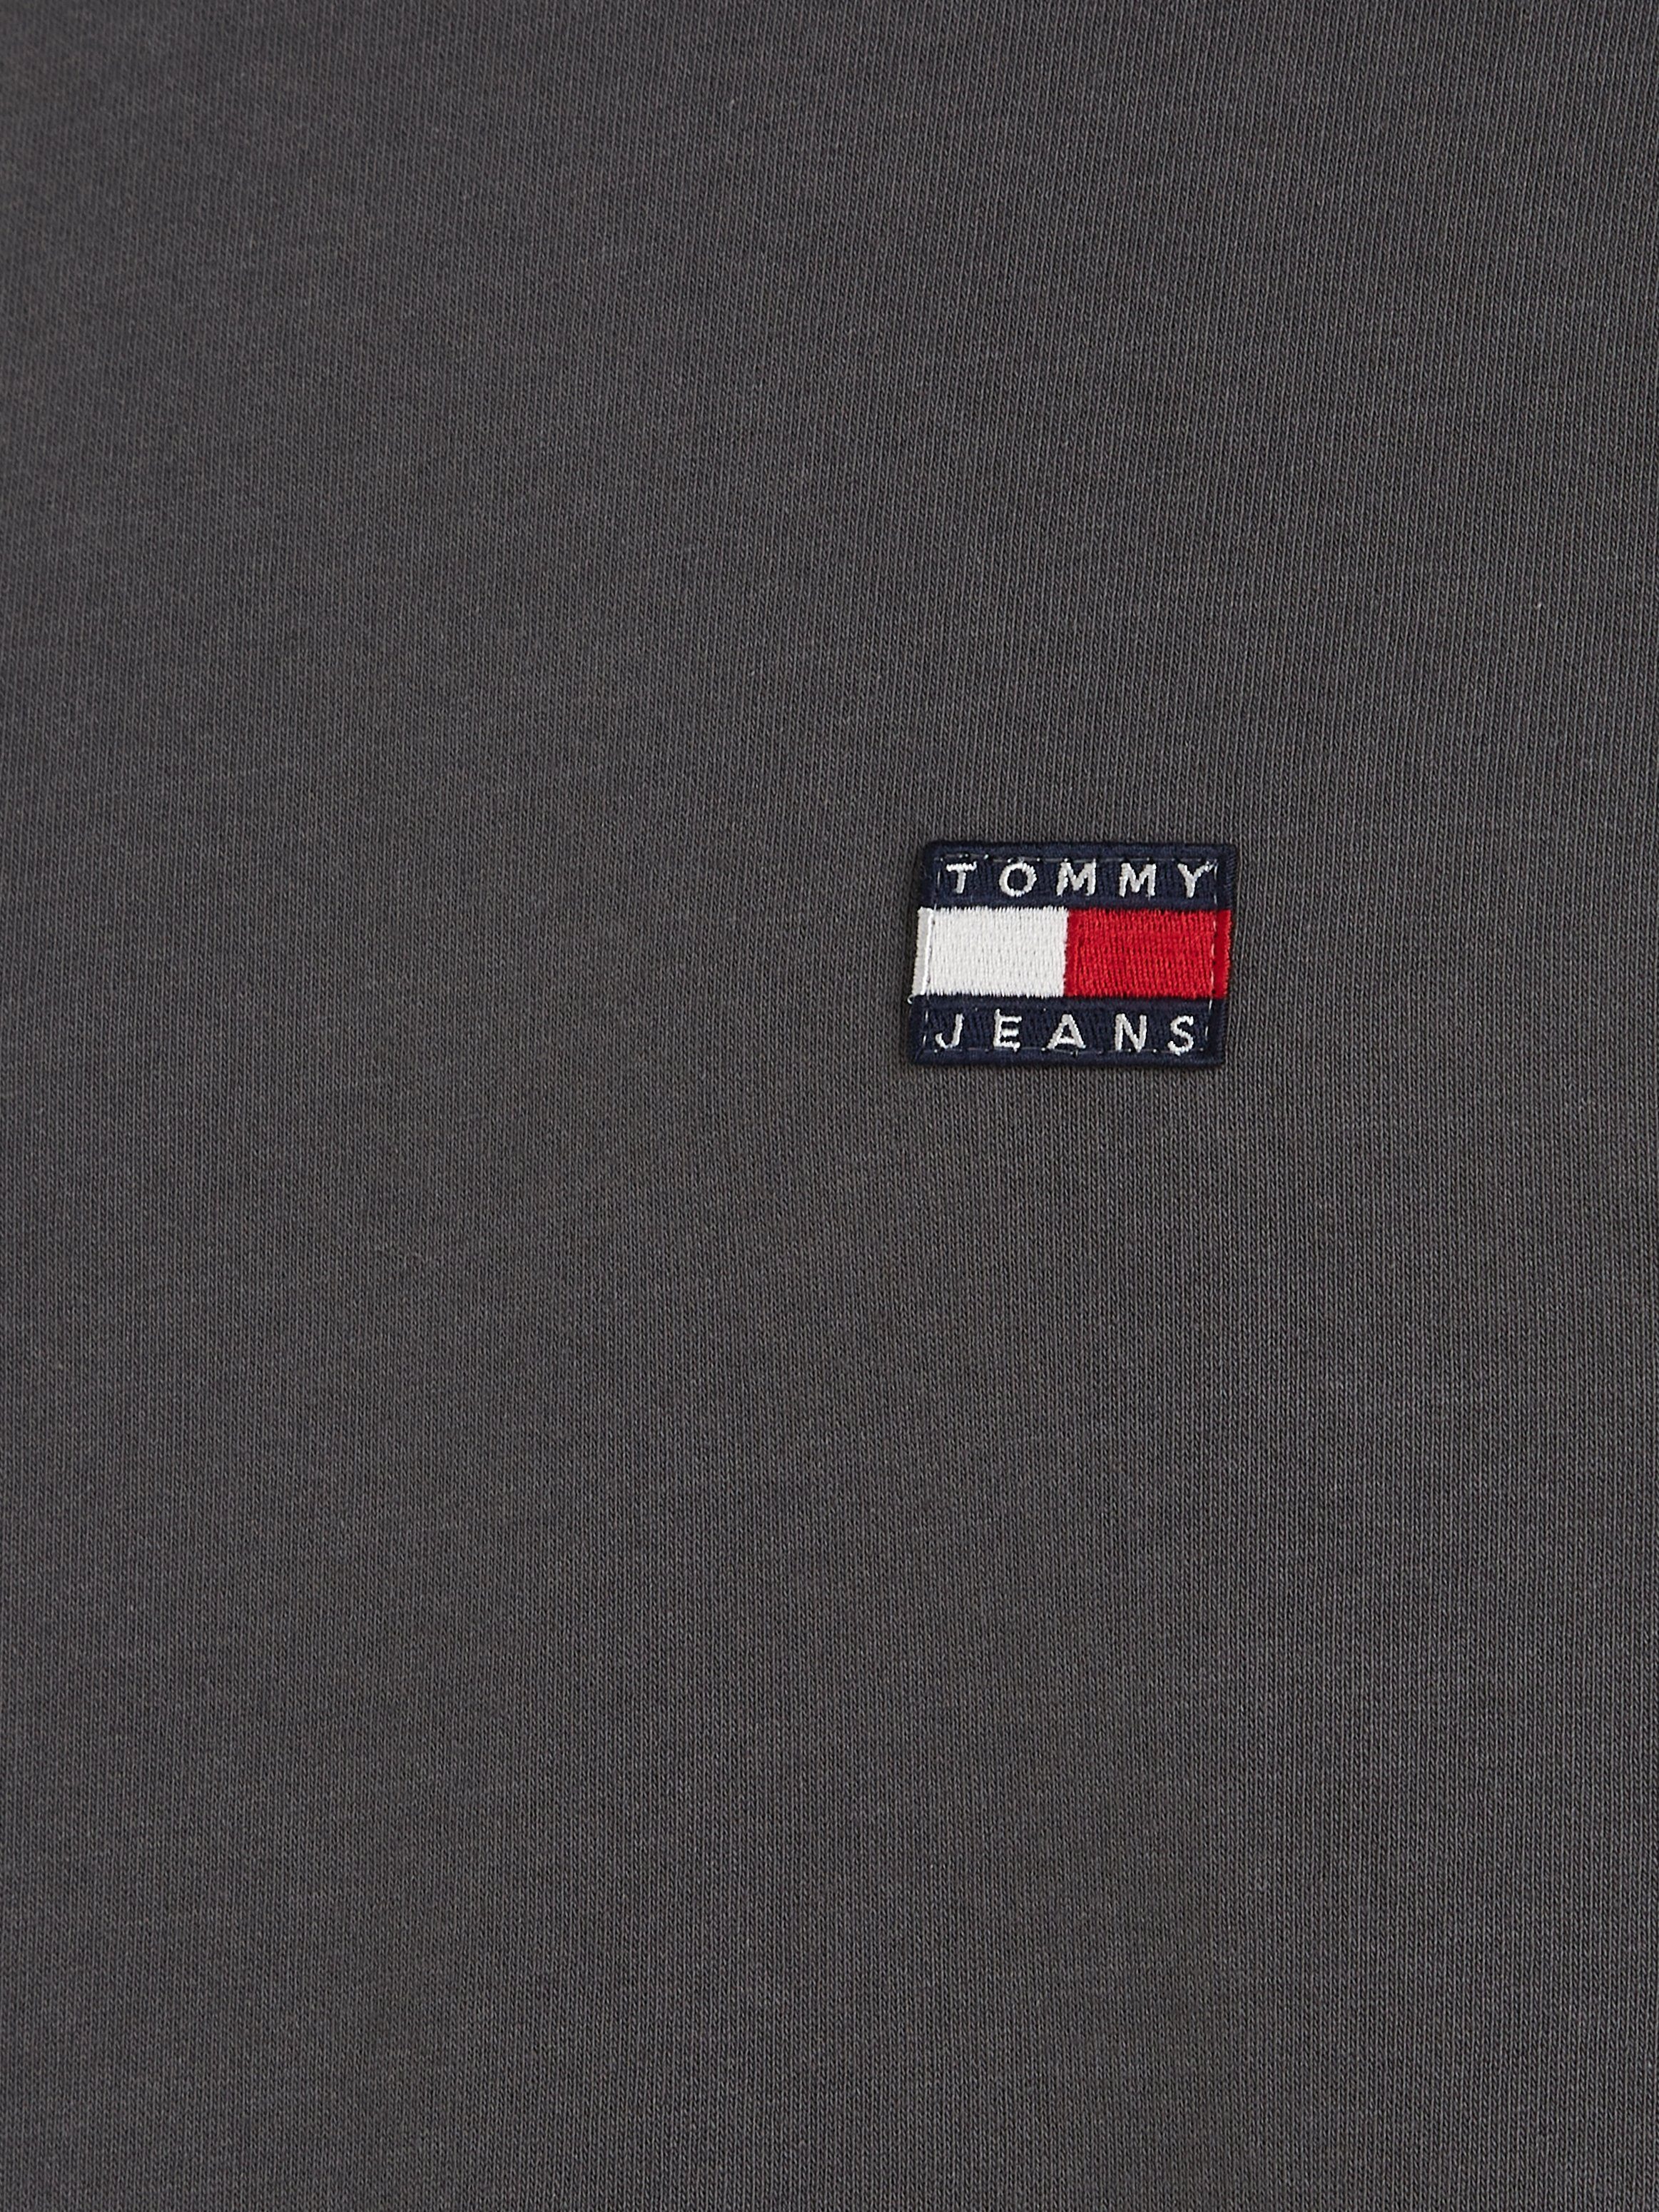 Tommy Jeans T-Shirt Charcoal TEE New TOMMY BADGE CLSC XS TJM